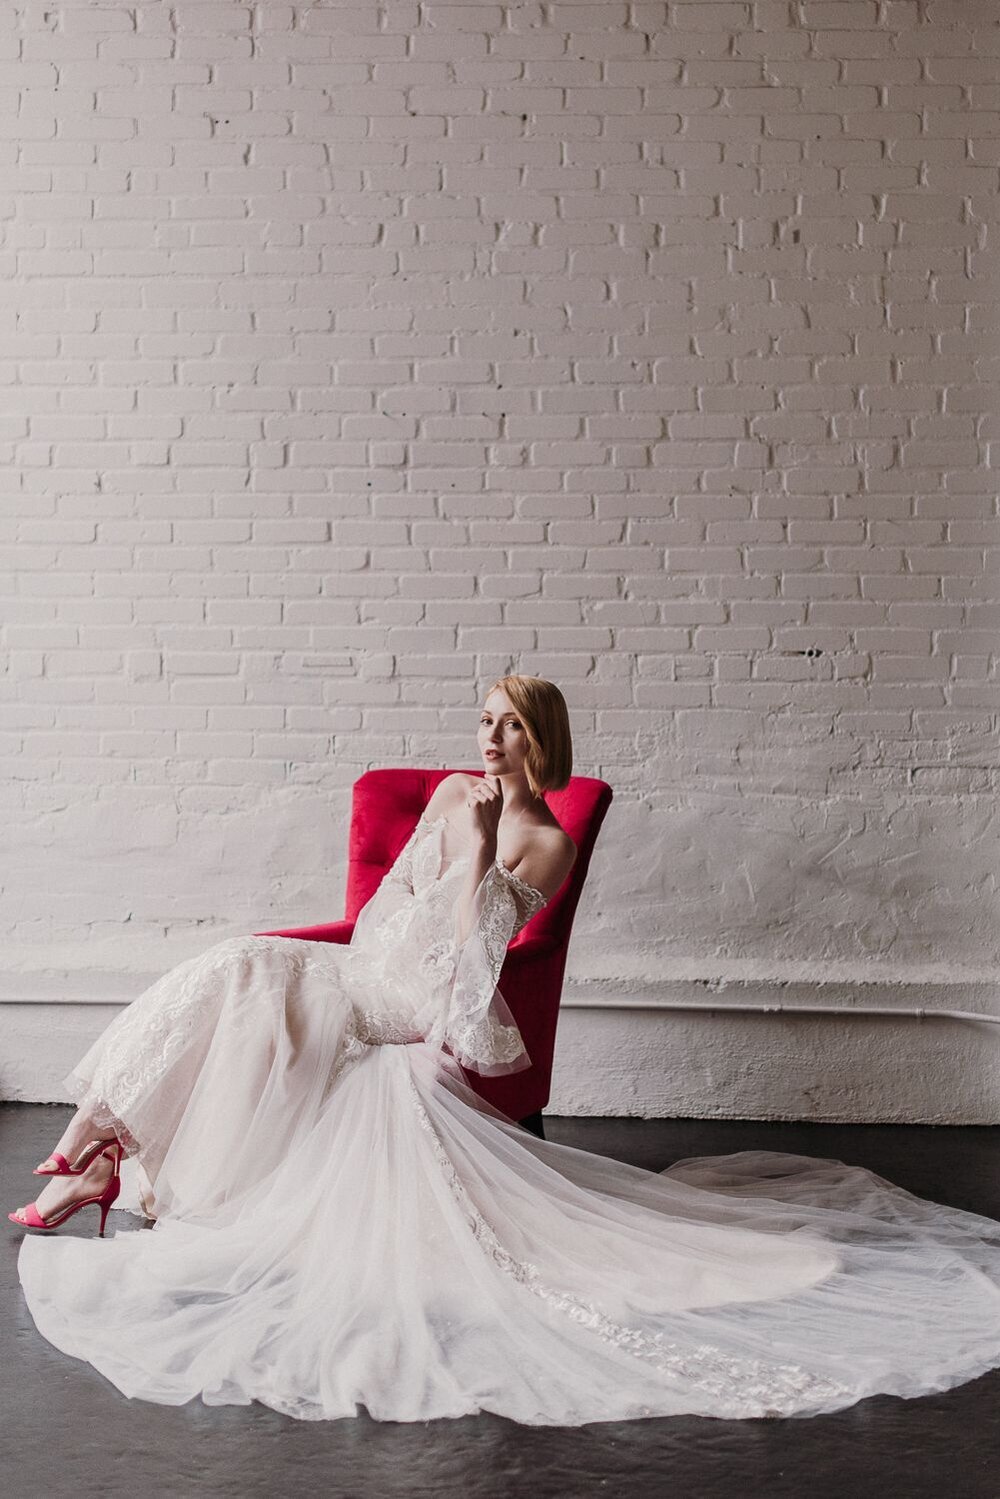 Can You Really Buy Your Wedding Dress Online?